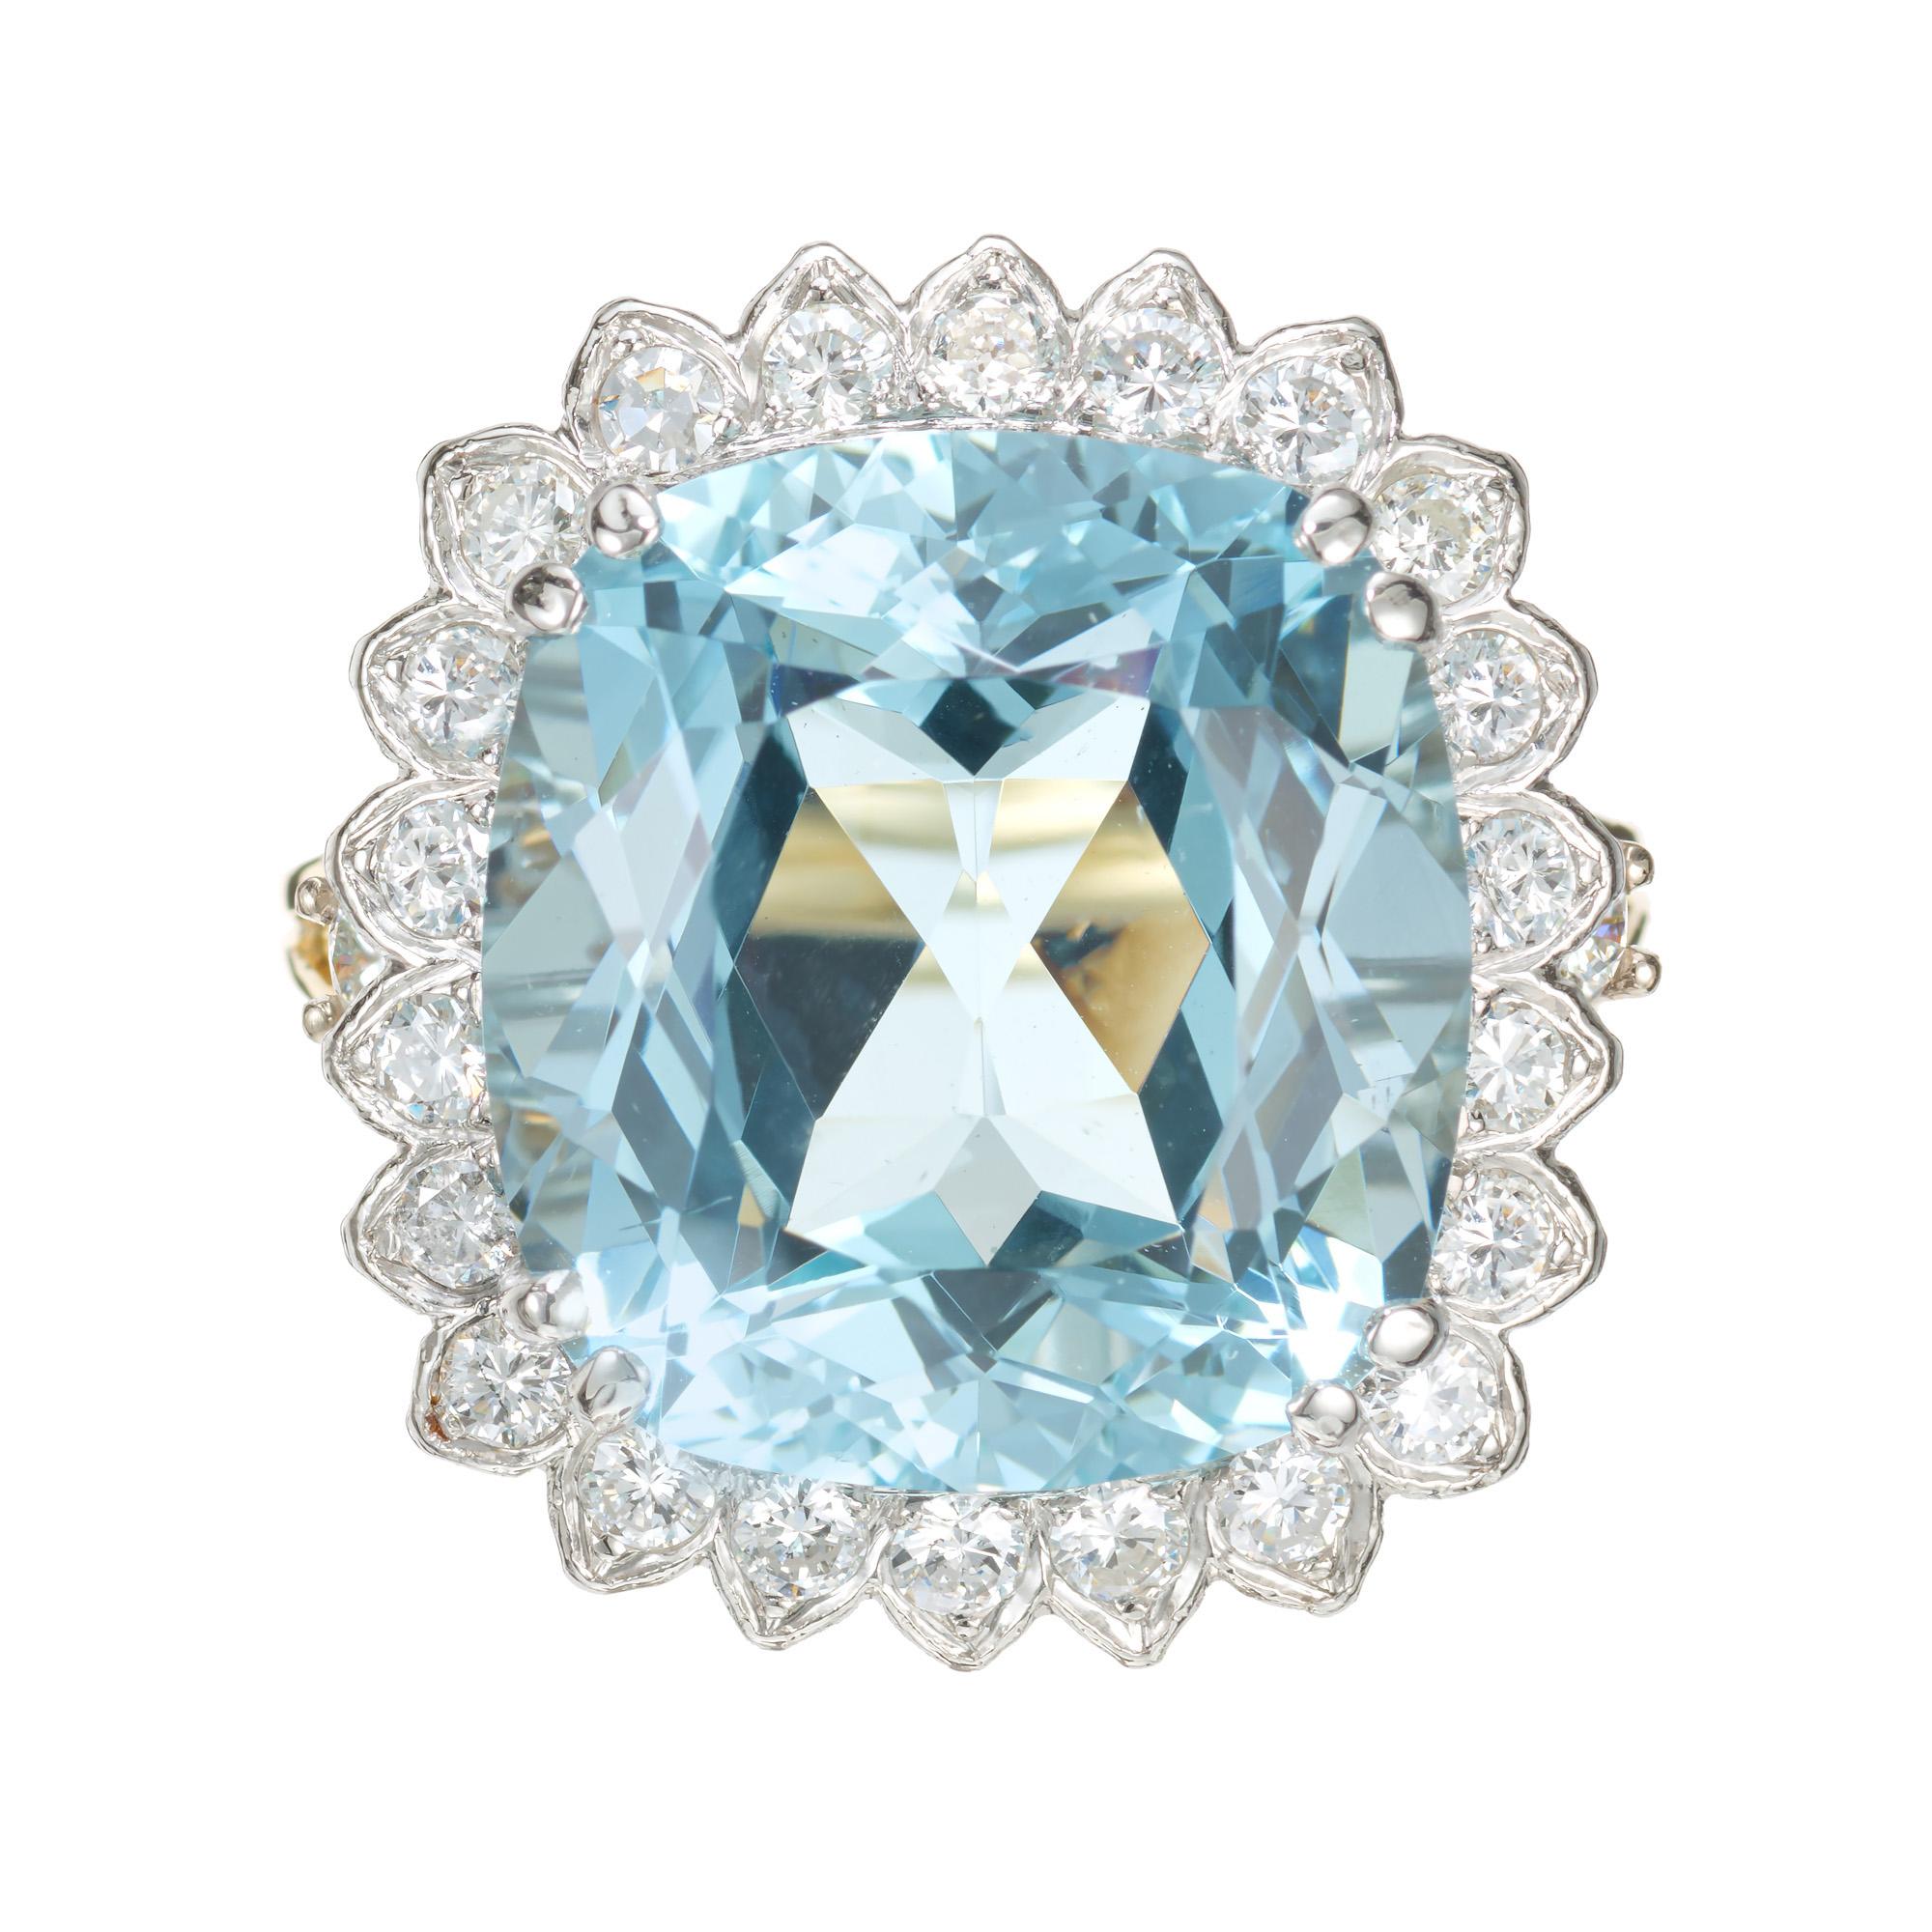 Aqua and diamond cocktail ring. 10.00ct cushion cut center aqua with a halo of 22 round full diamonds set in a two-tone handmade cocktail setting. The untreated sits in a 18k white gold crown with an 18k yellow gold shank accented with two round cut